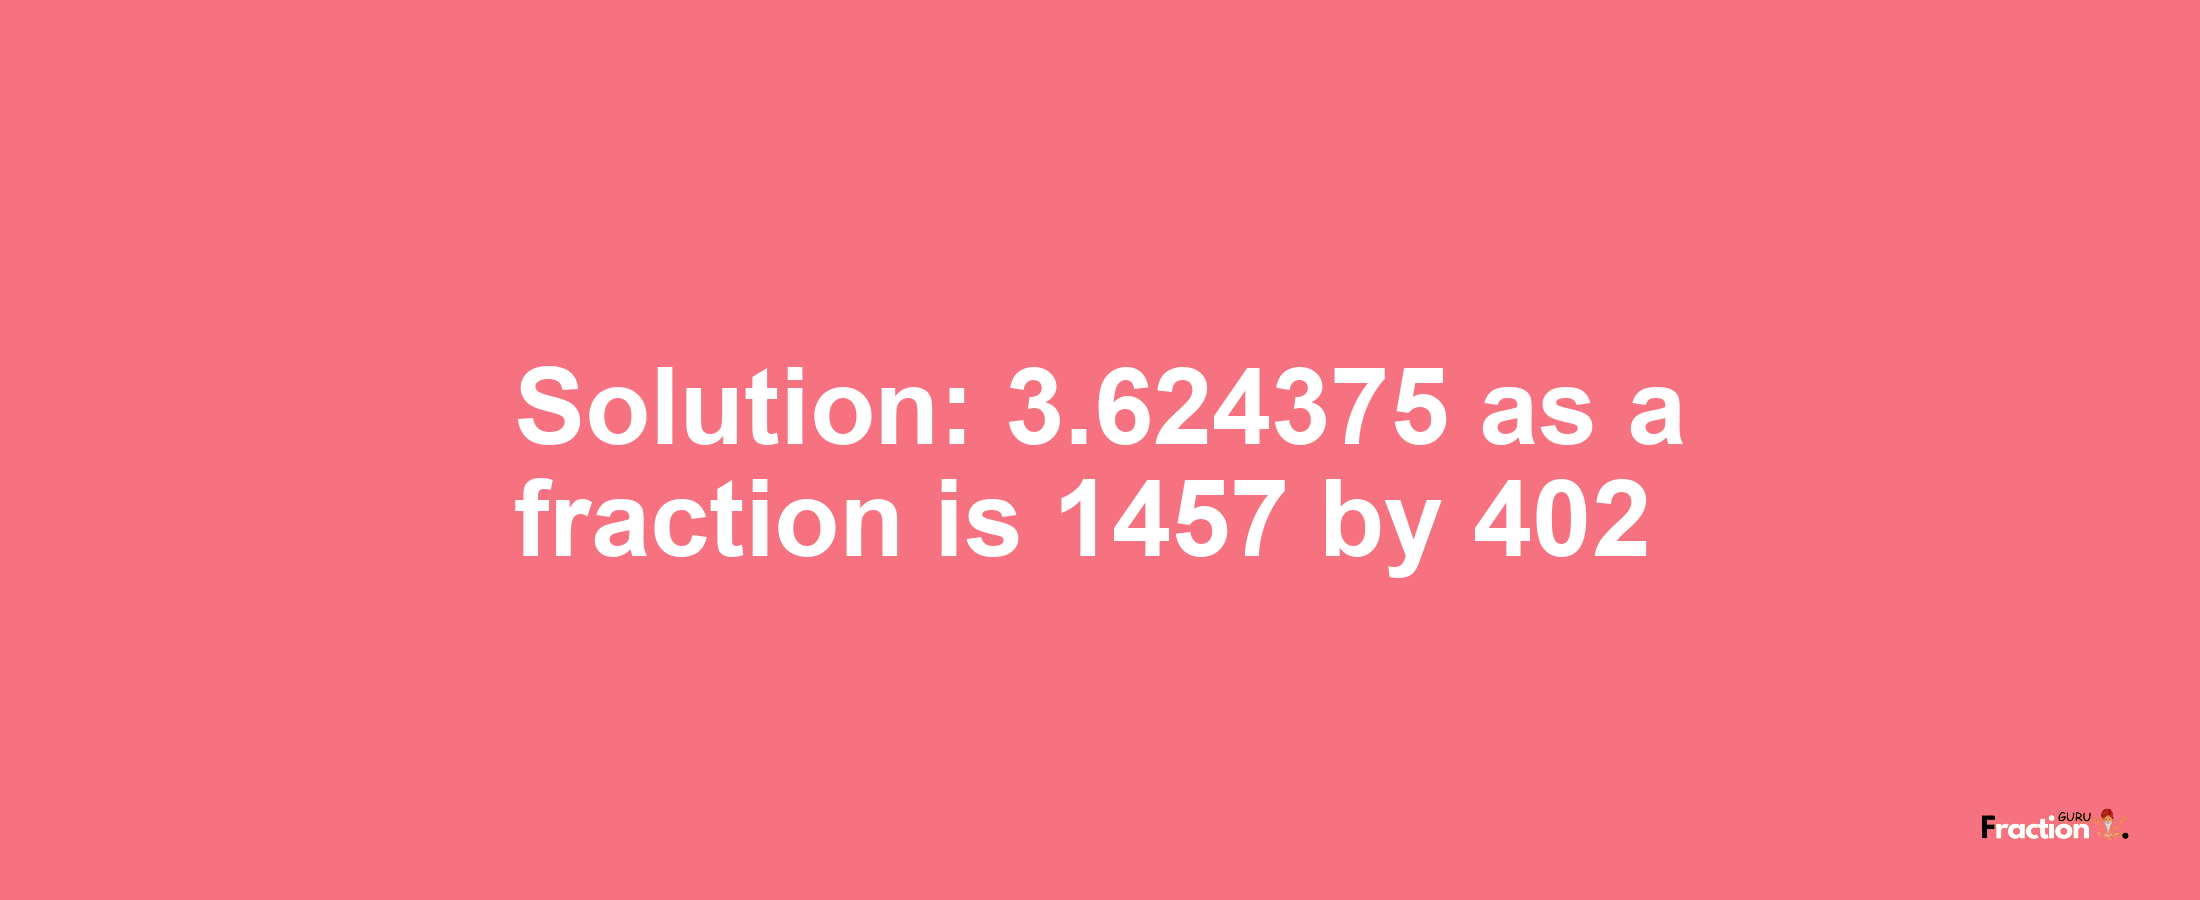 Solution:3.624375 as a fraction is 1457/402